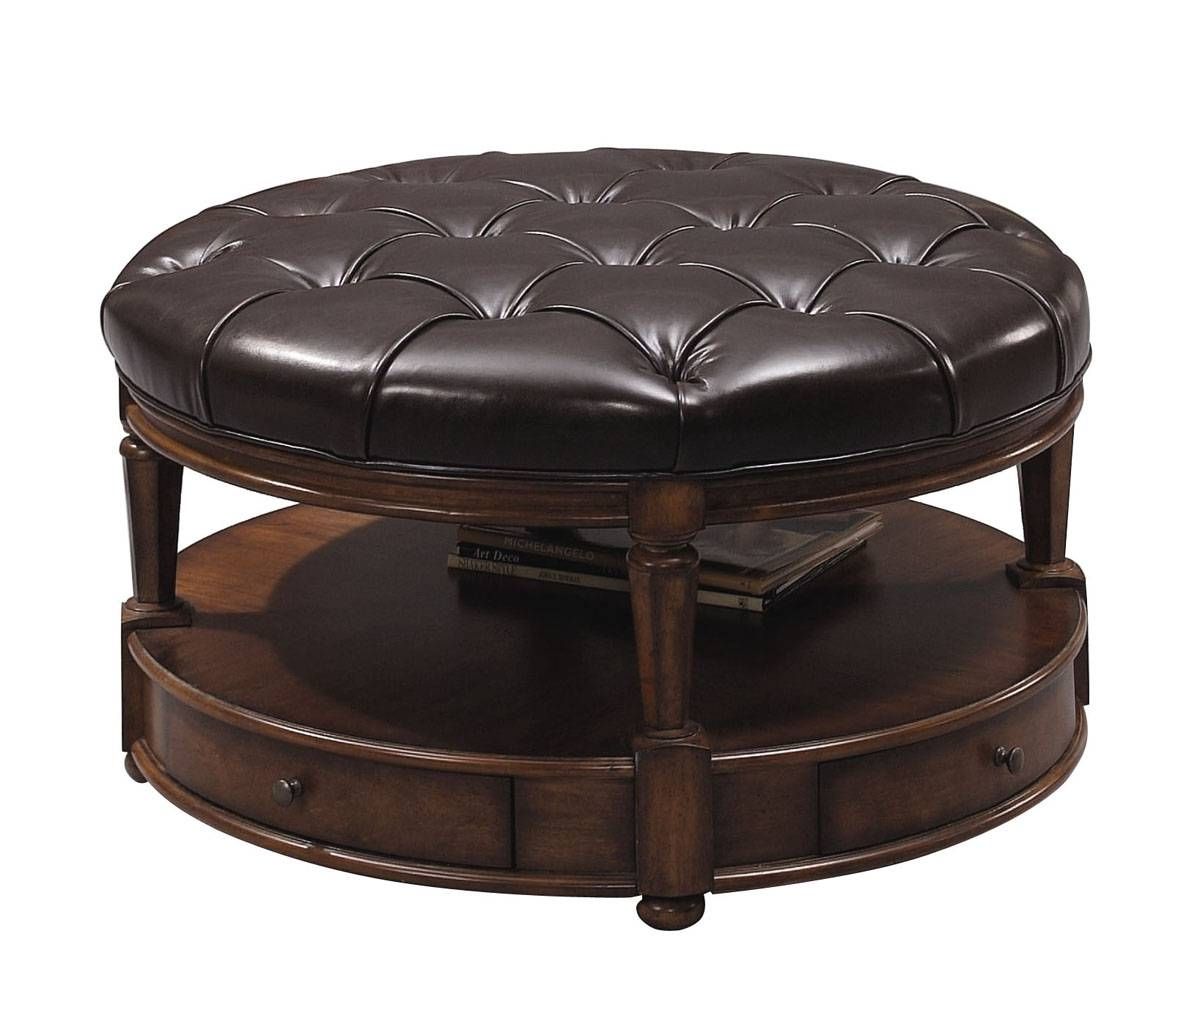 Round Coffee Table With Pull Out Ottomans | Coffee Tables Decoration Throughout Round Upholstered Coffee Tables (View 26 of 30)